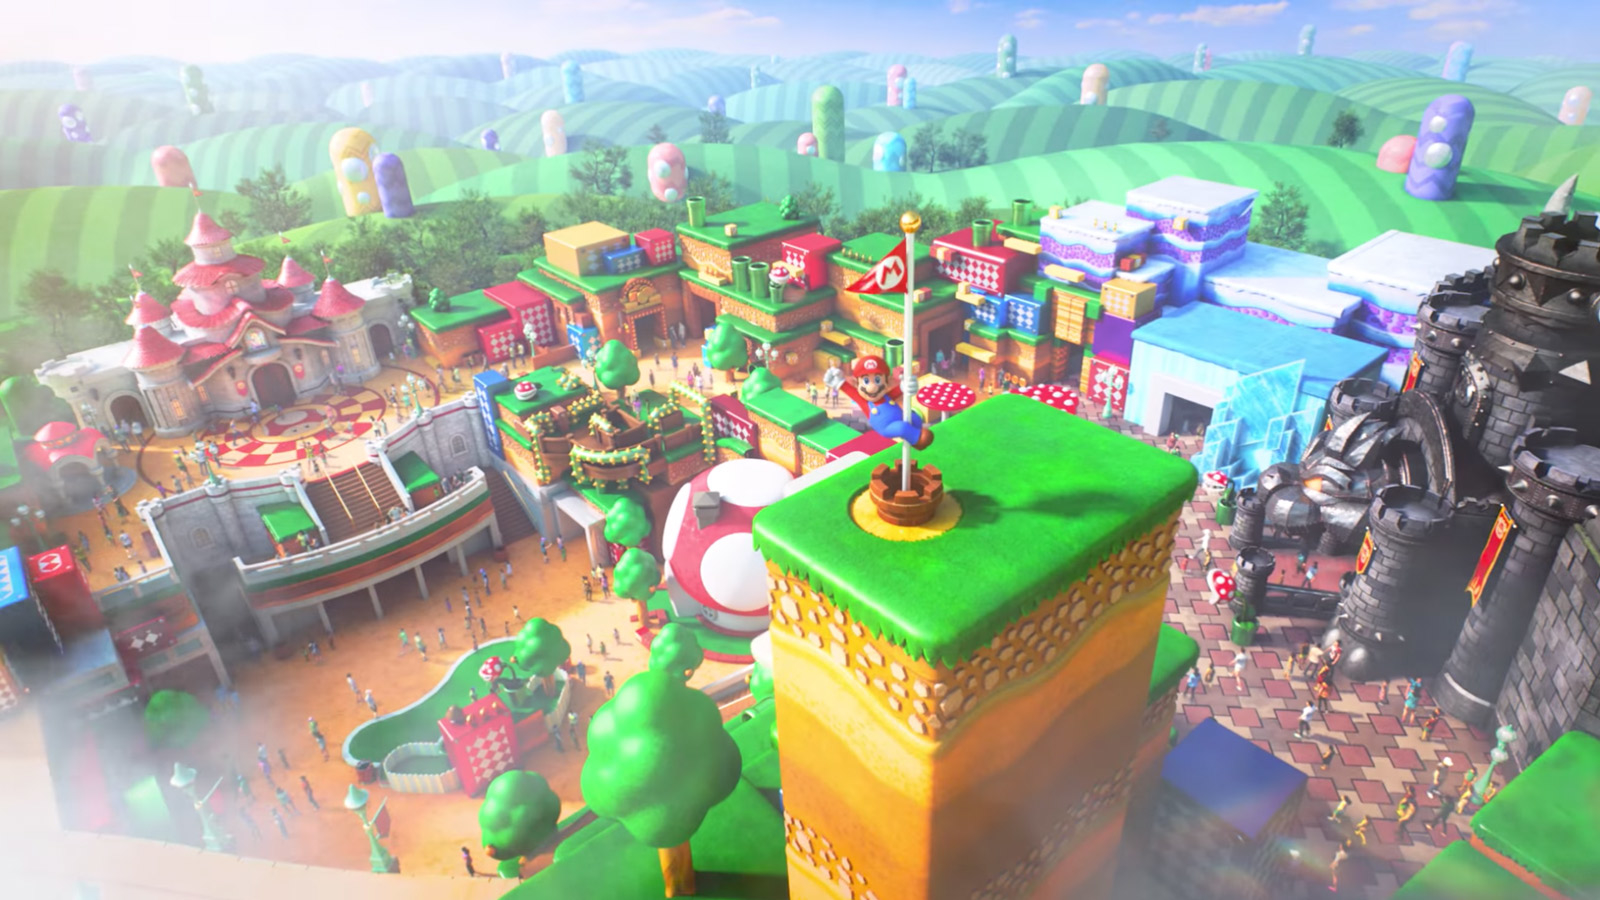 New Details about Super Nintendo World Released